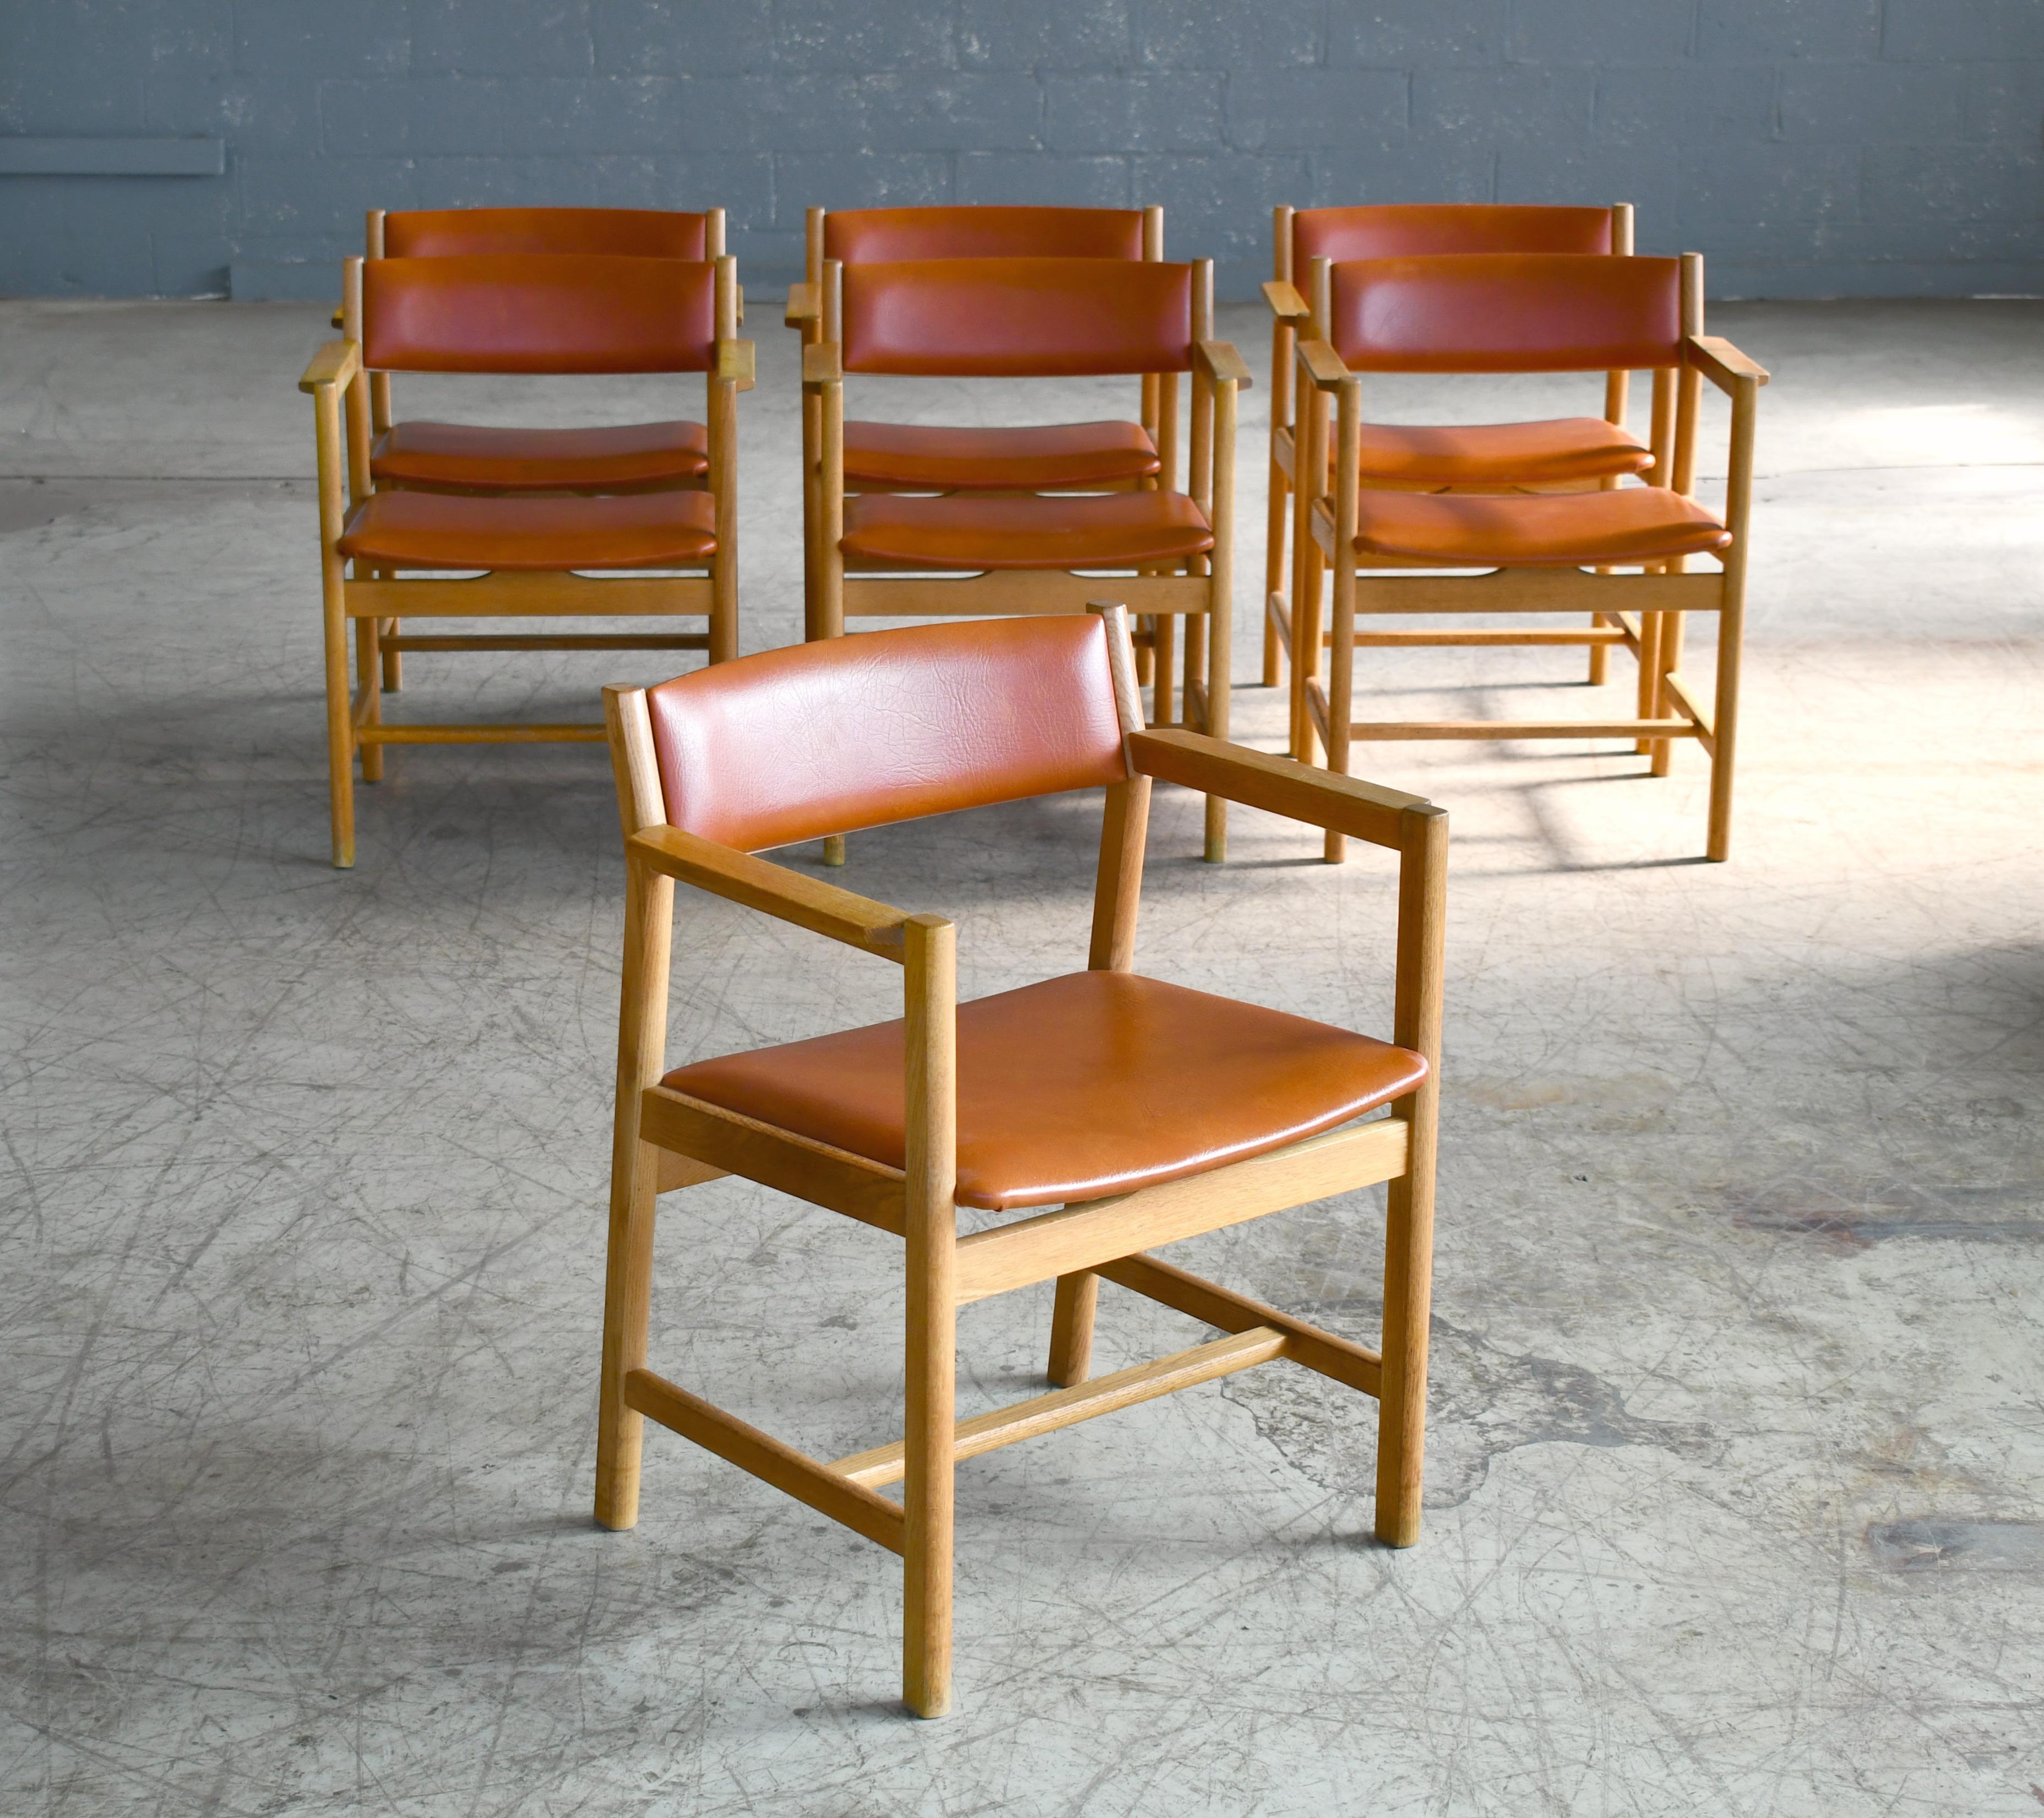 Fantastic set of seven late 1960s dining chairs designed by Børge Mogensen as model 101 for Søborg Møbelfabrik. Søborg was one of the high quality makers of the era located just outside Copenhagen and one of the main producers for designers for